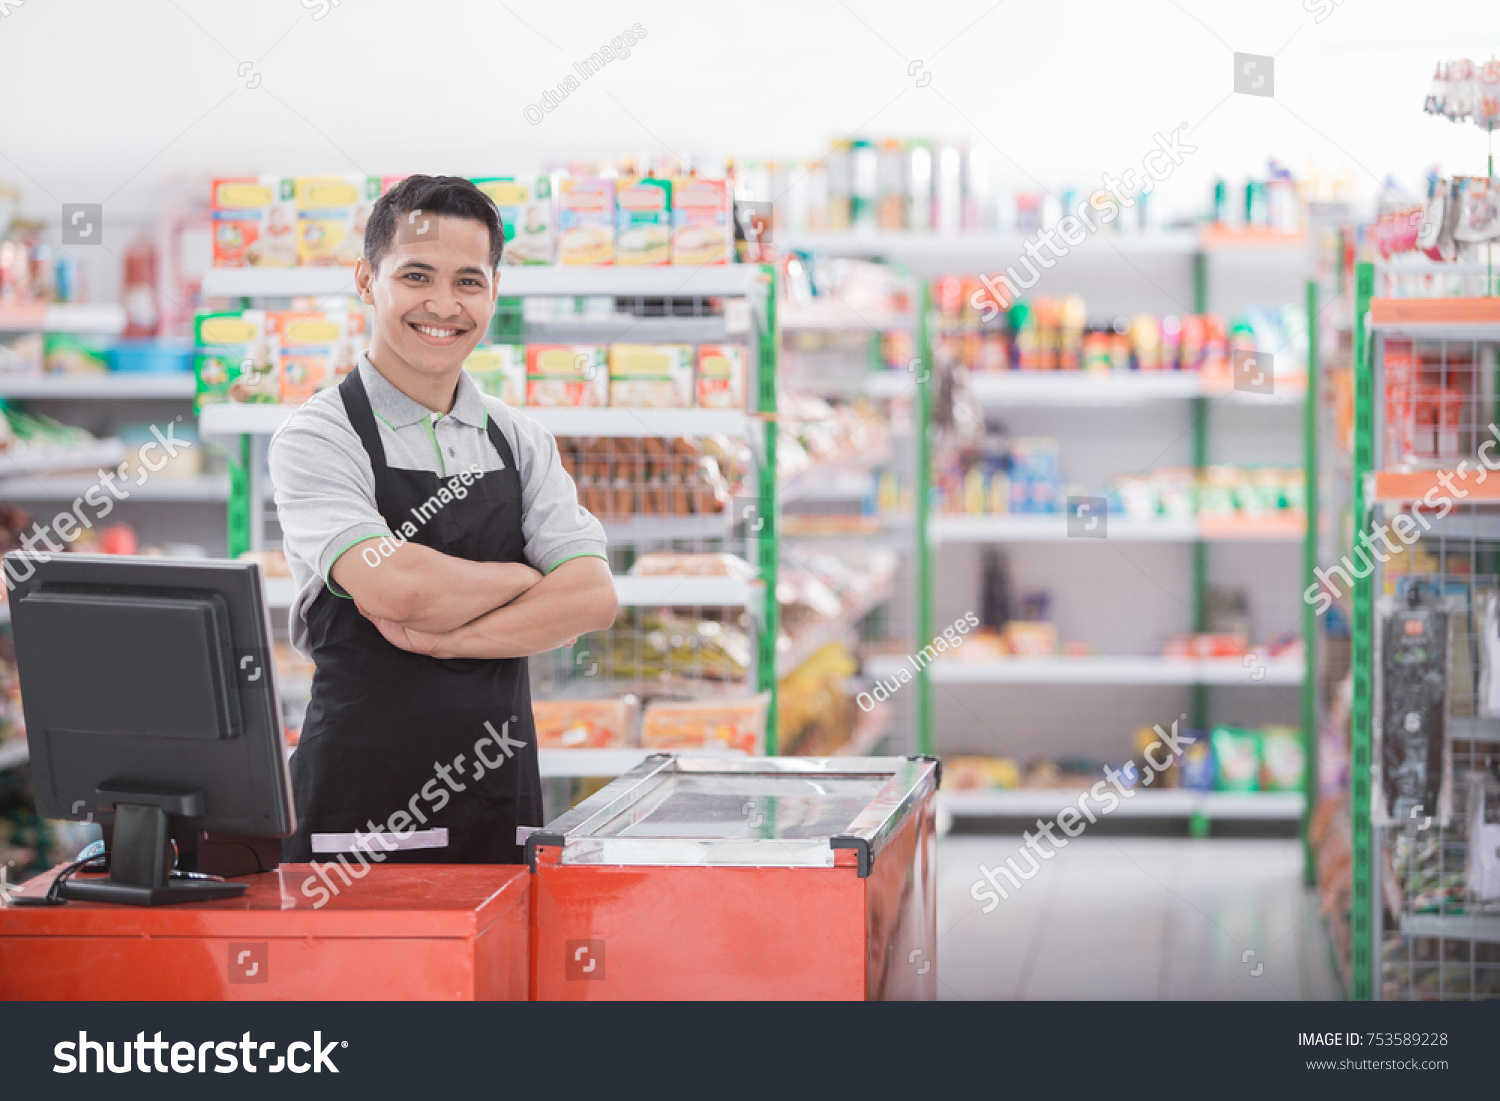 Portrait of a smiling shopkeeper in a grocery store #753589228